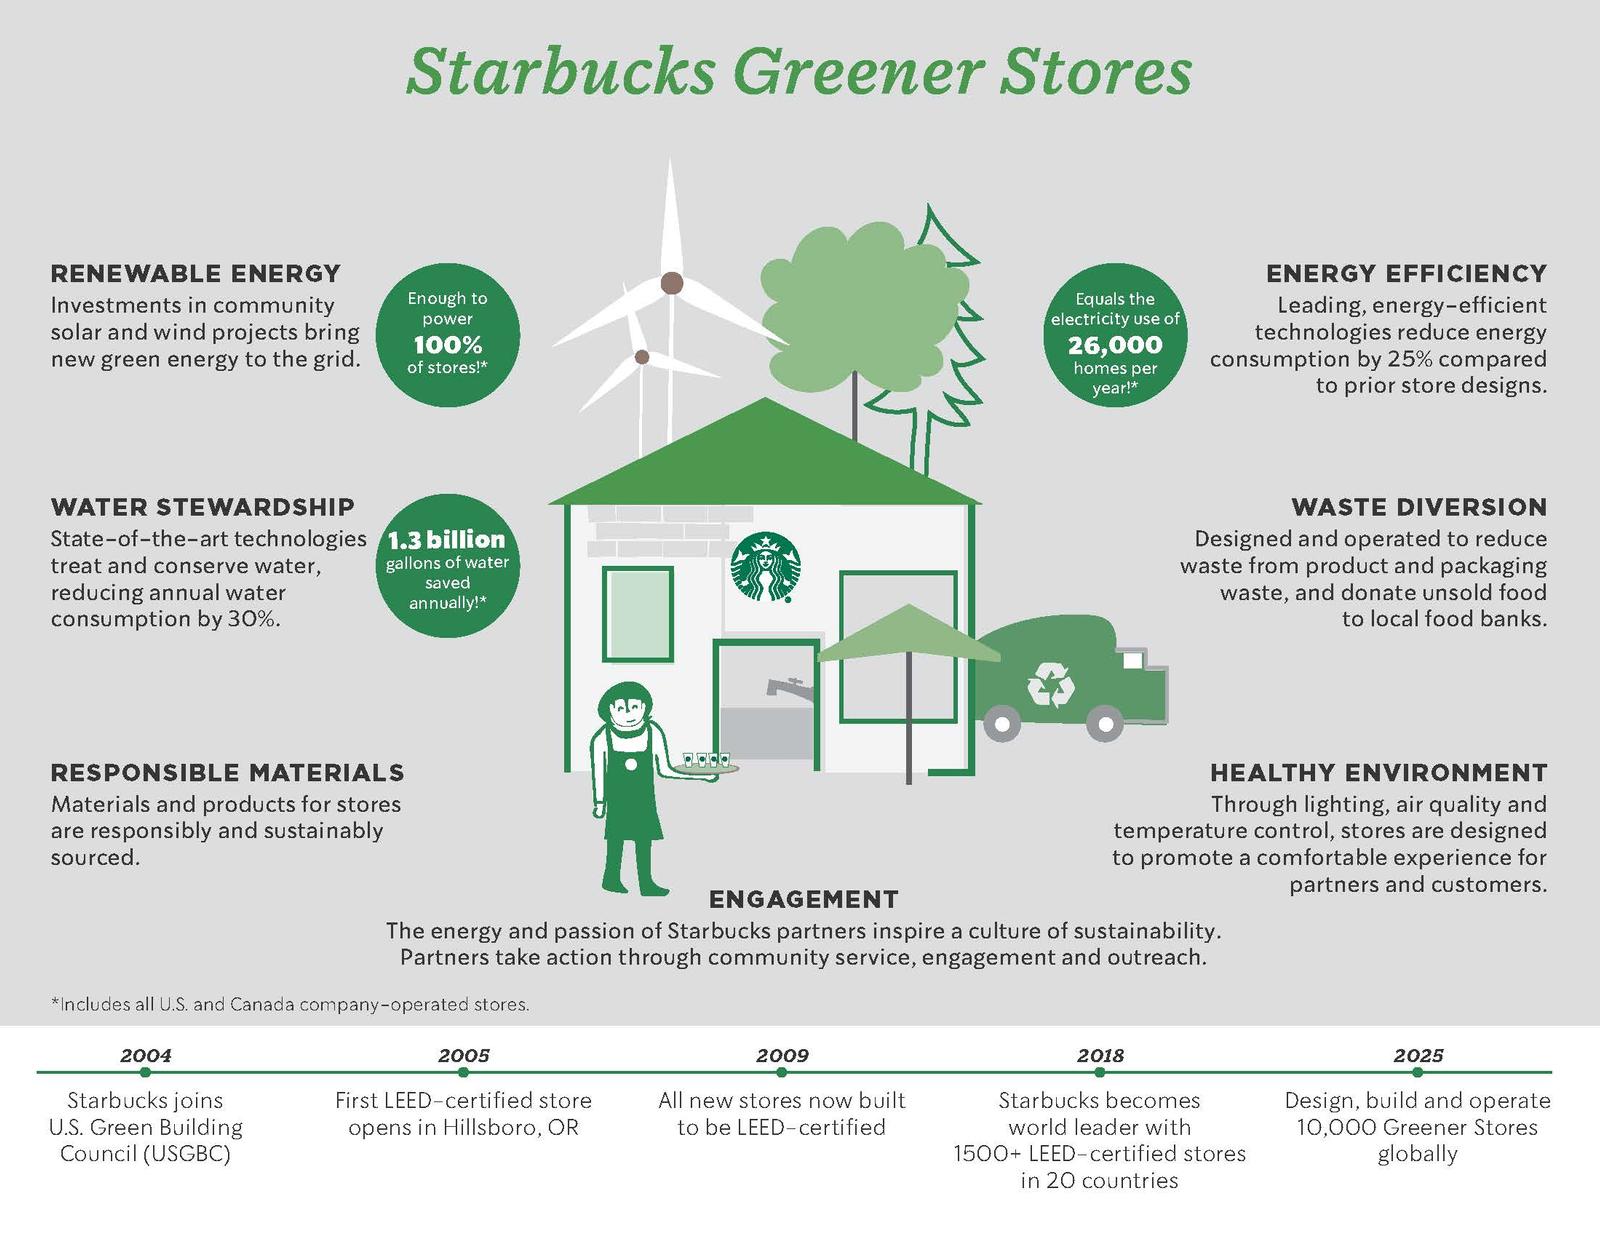 Starbucks Will Build 10,000 EcoFriendly Stores By 2025